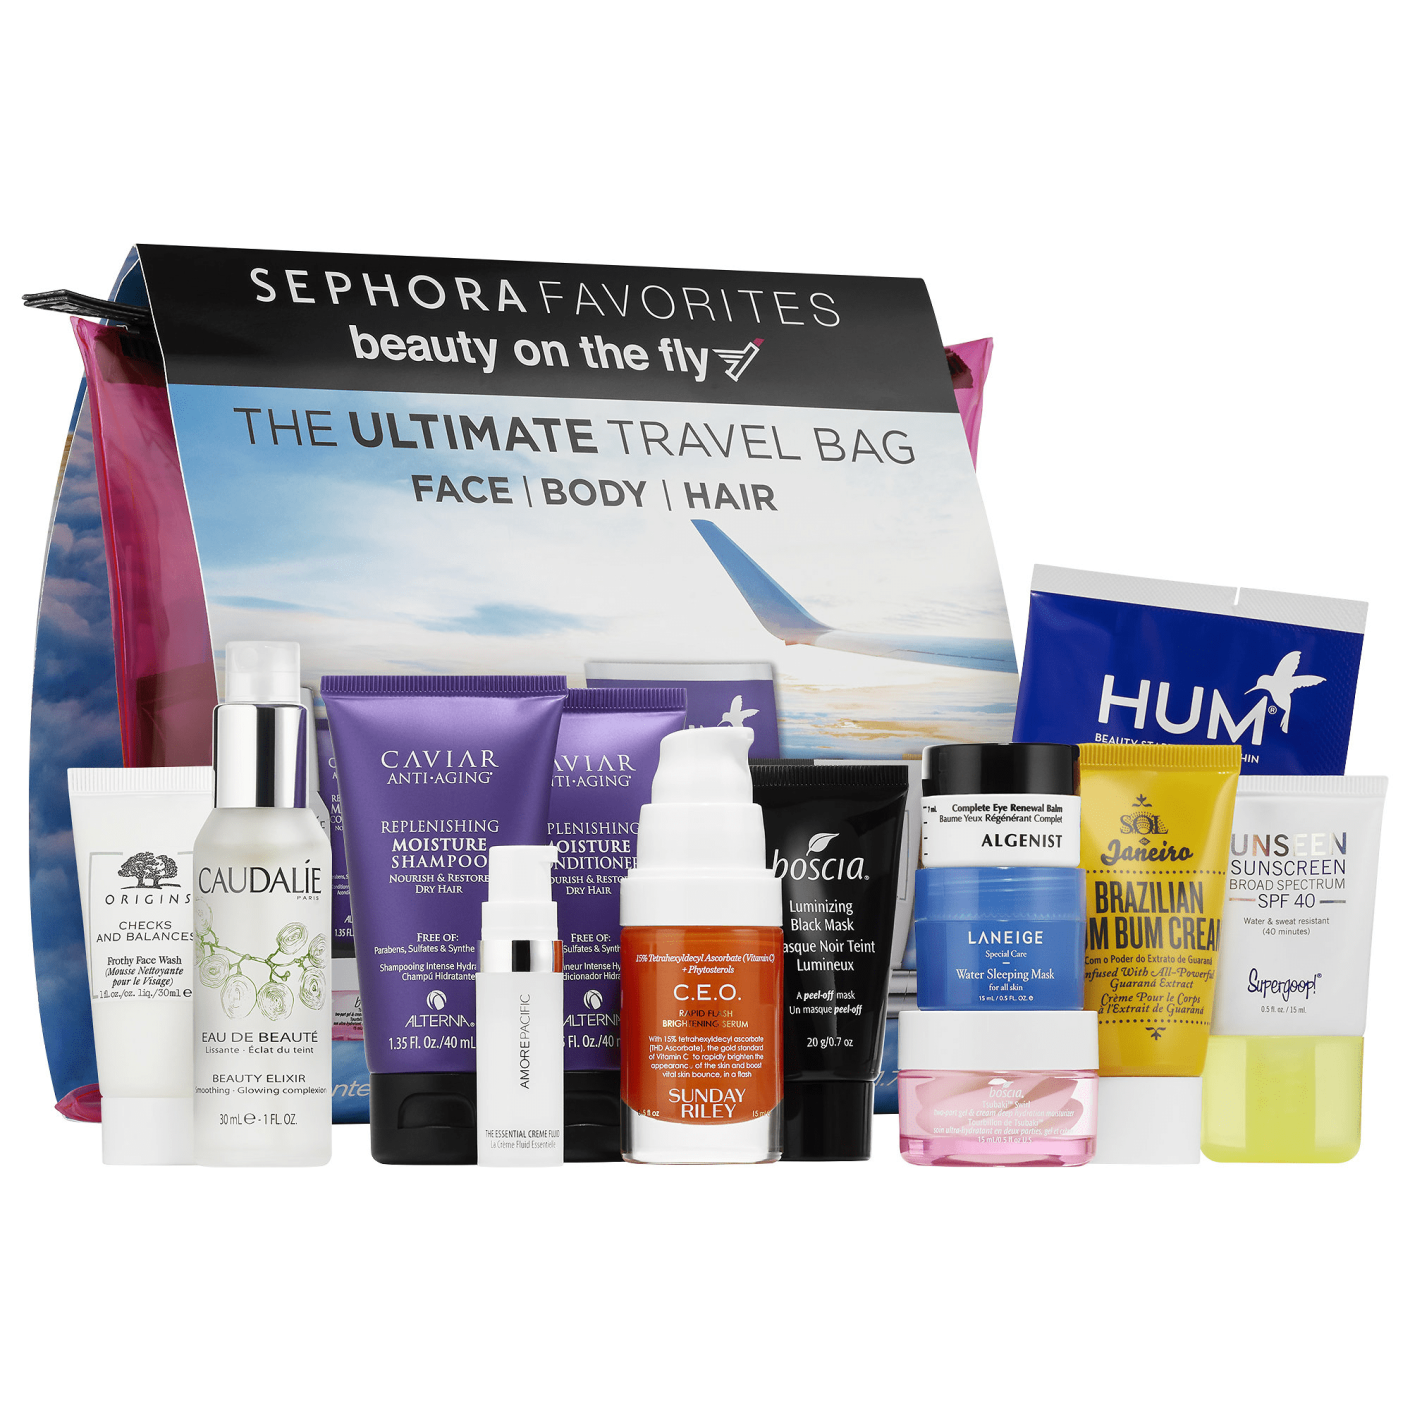 New Sephora Favorites Kits Available Now The Ultimate Travel Bag Kit